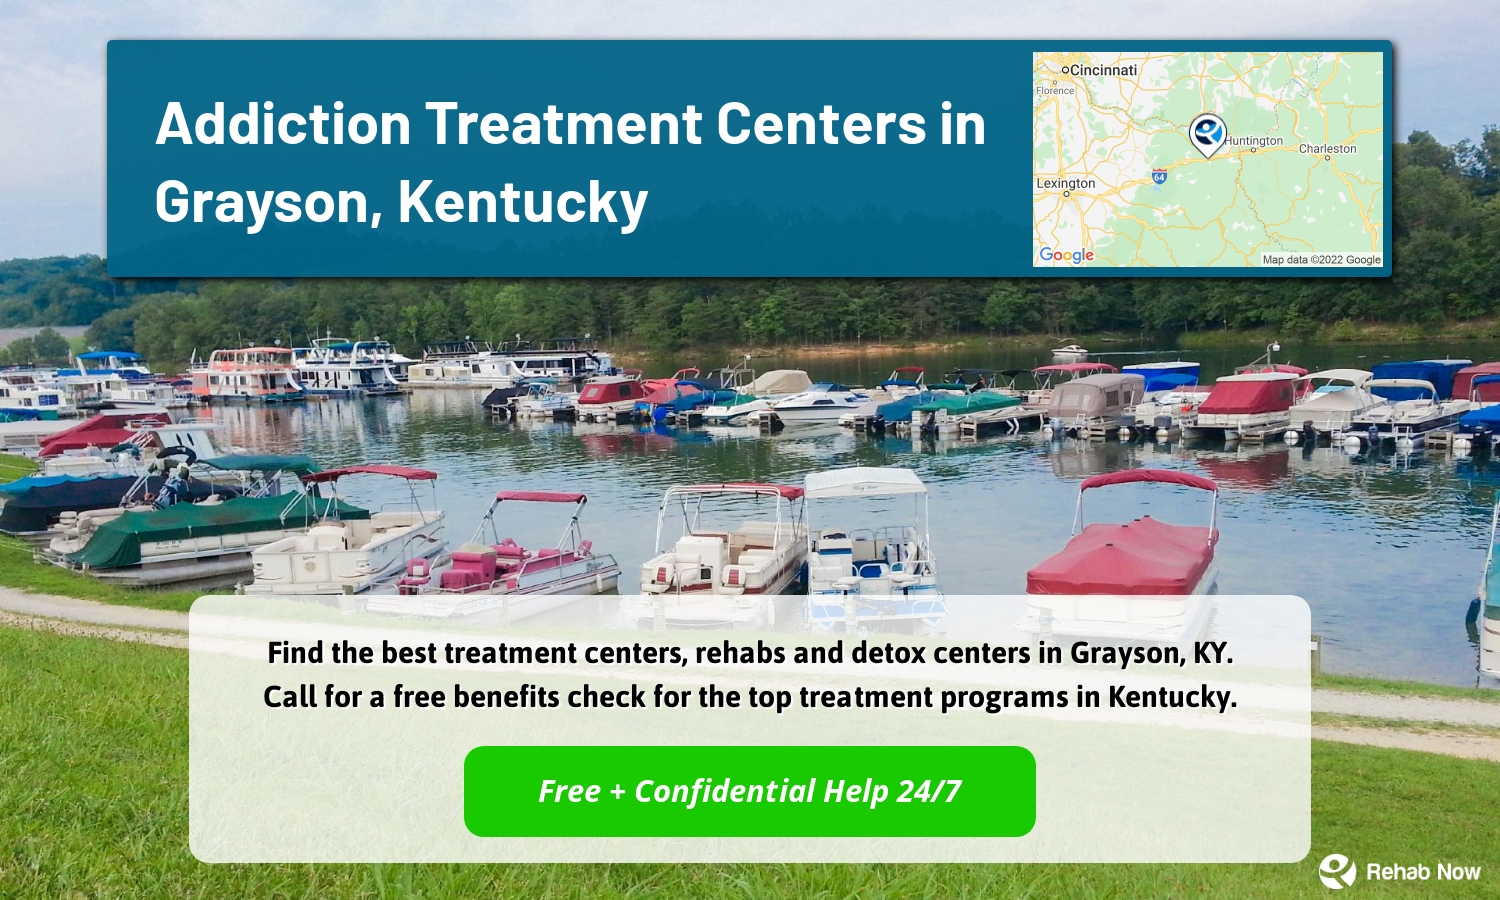 Find the best treatment centers, rehabs and detox centers in Grayson, KY. Call for a free benefits check for the top treatment programs in Kentucky.